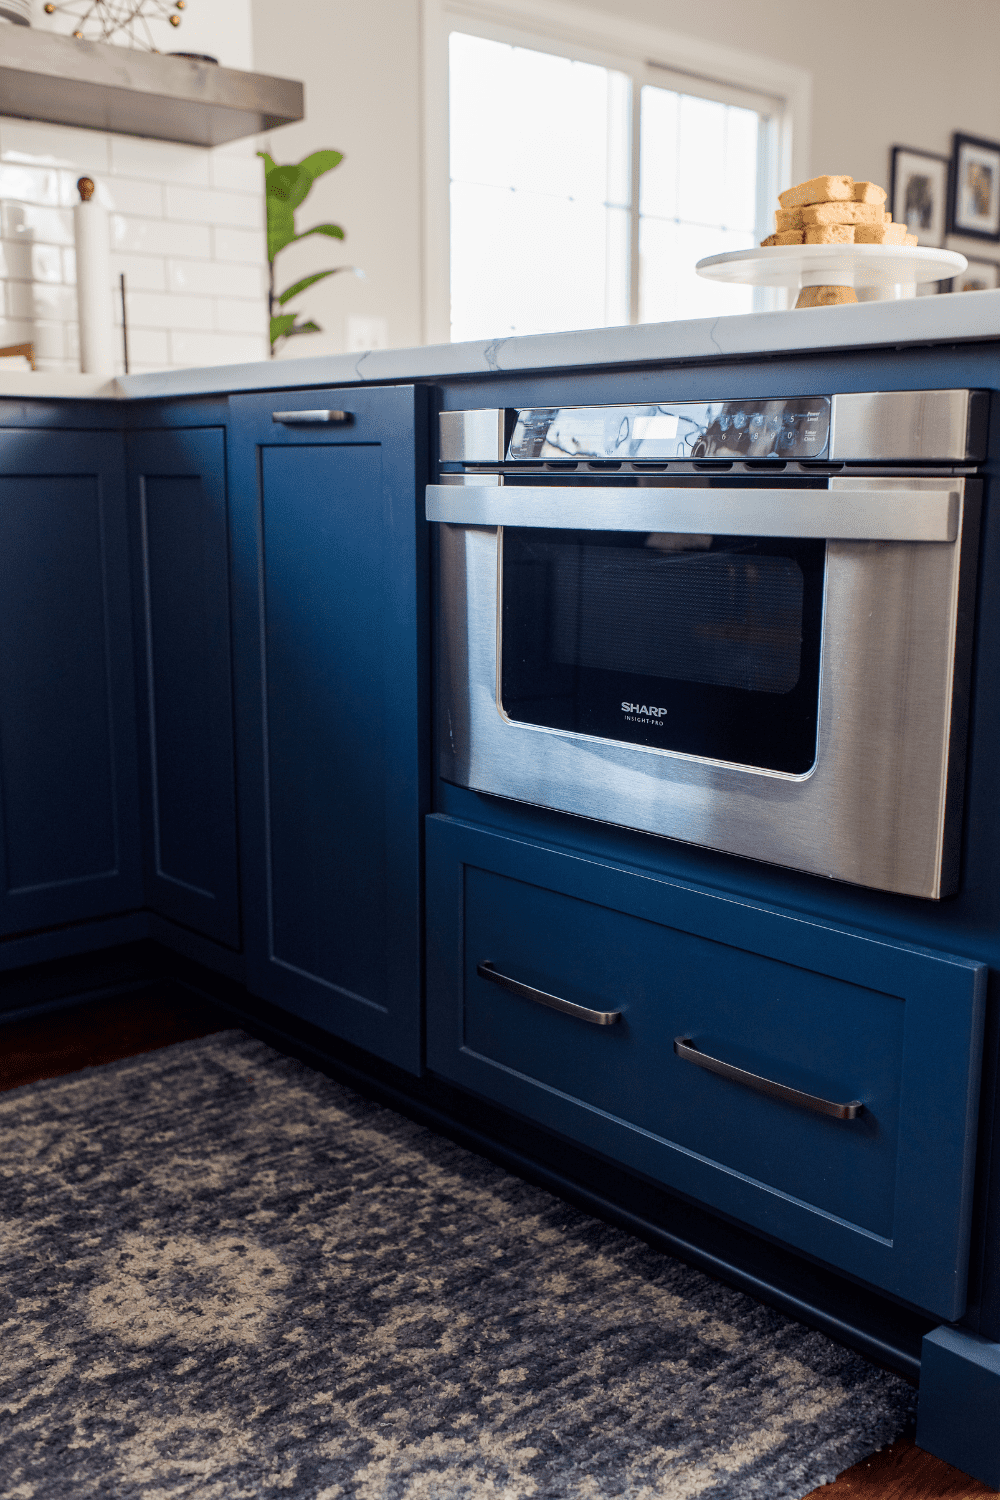 Nicholas Design Build | A kitchen with blue cabinets and a microwave.